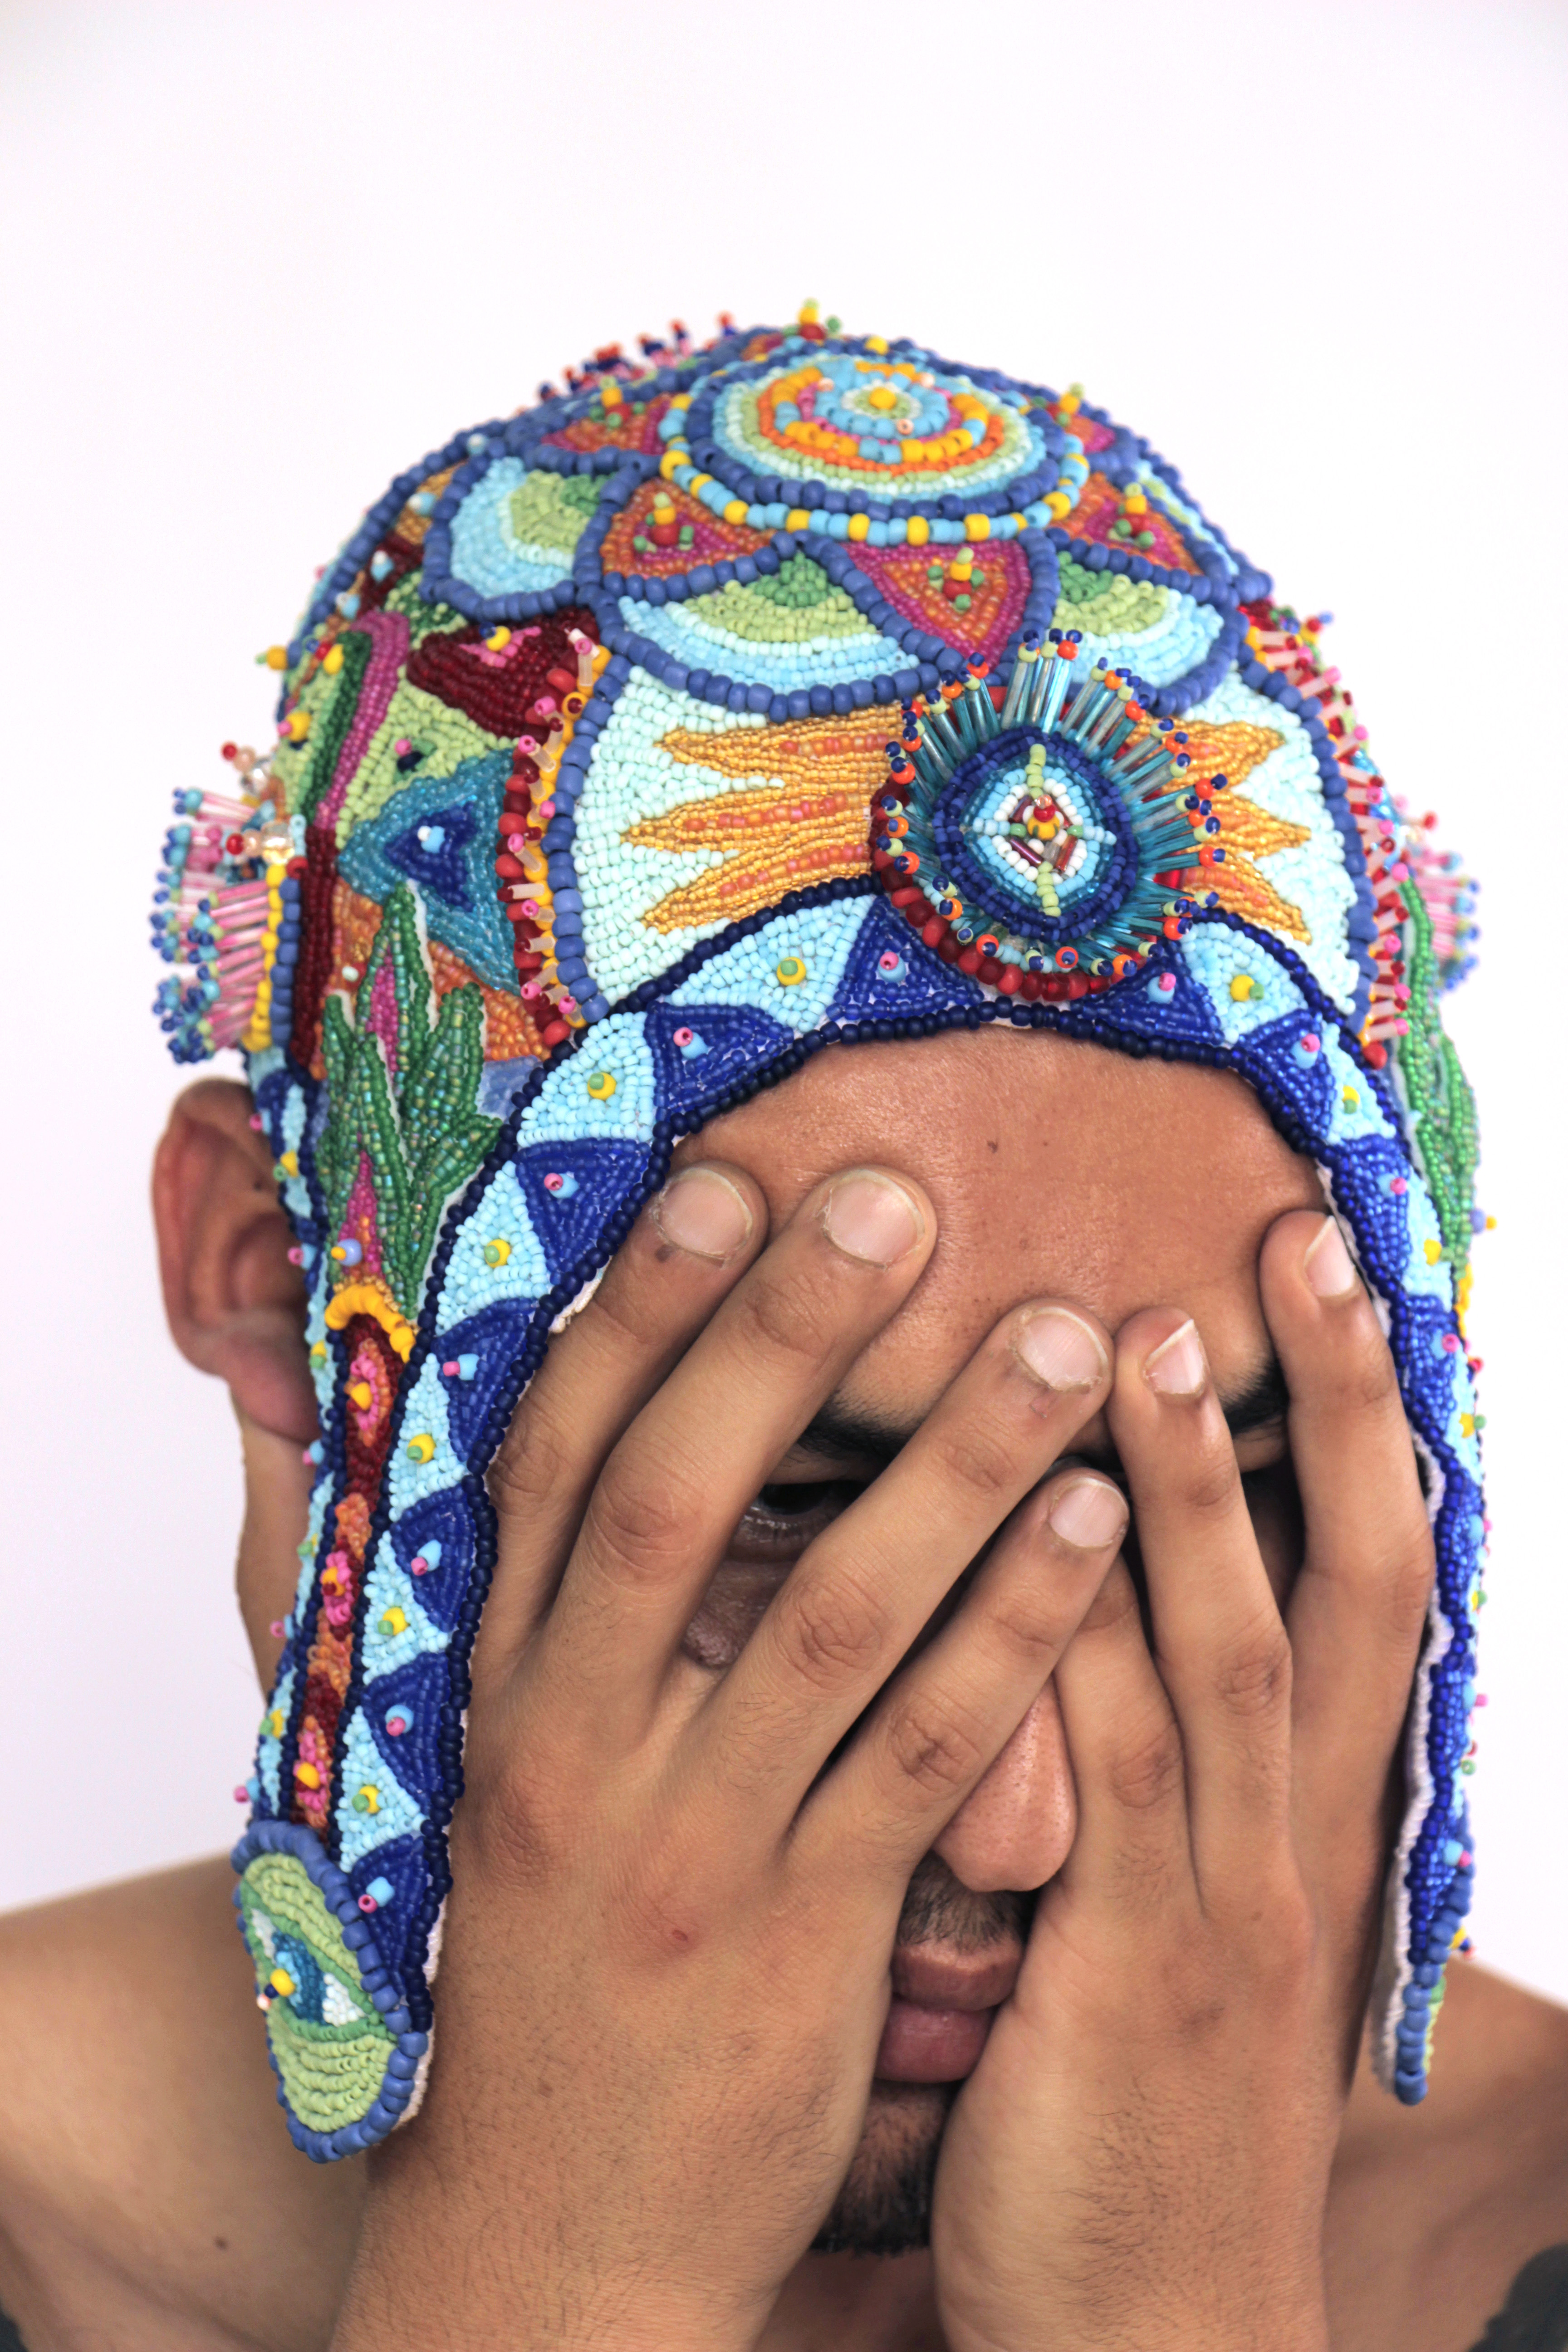 Isa Guadalupe, Aurora del Pensamiento (detail), 2023.  Hand-beaded headpiece with glass beads on cotton and felt. Modeled by Andrés García. Photography by Socrates Medina, 2023.